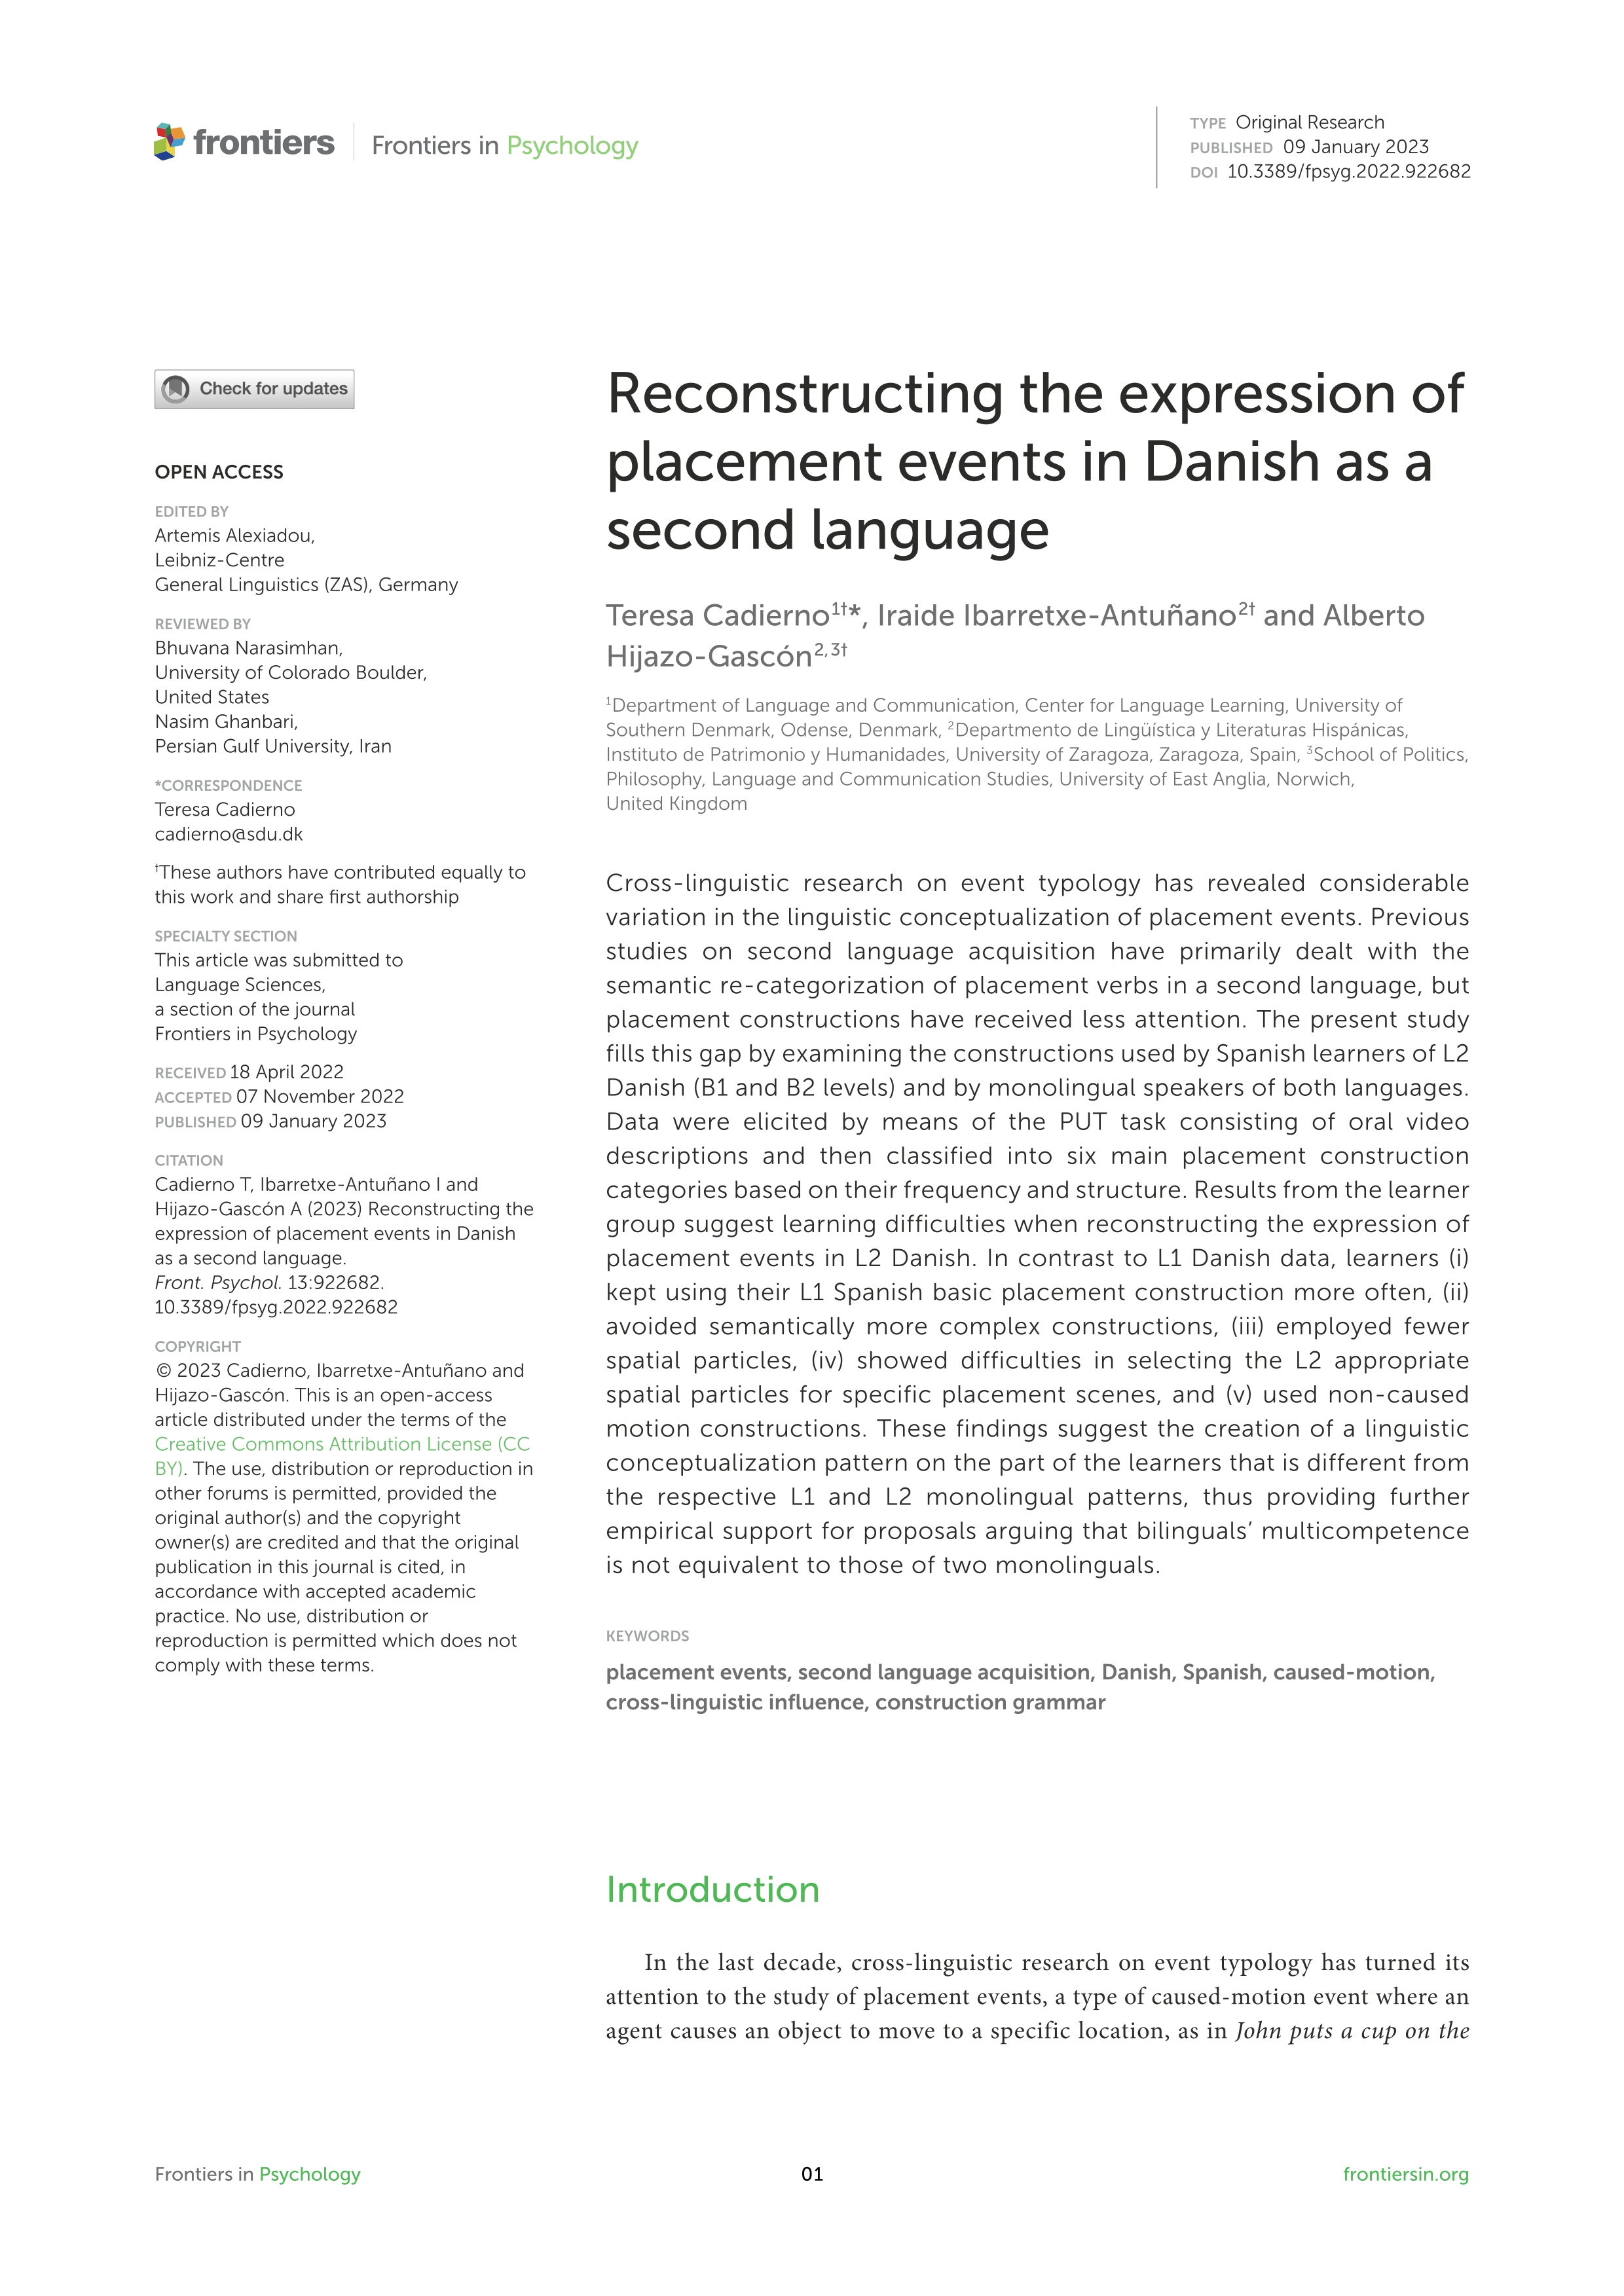 Reconstructing the expression of placement events in Danish as a second language